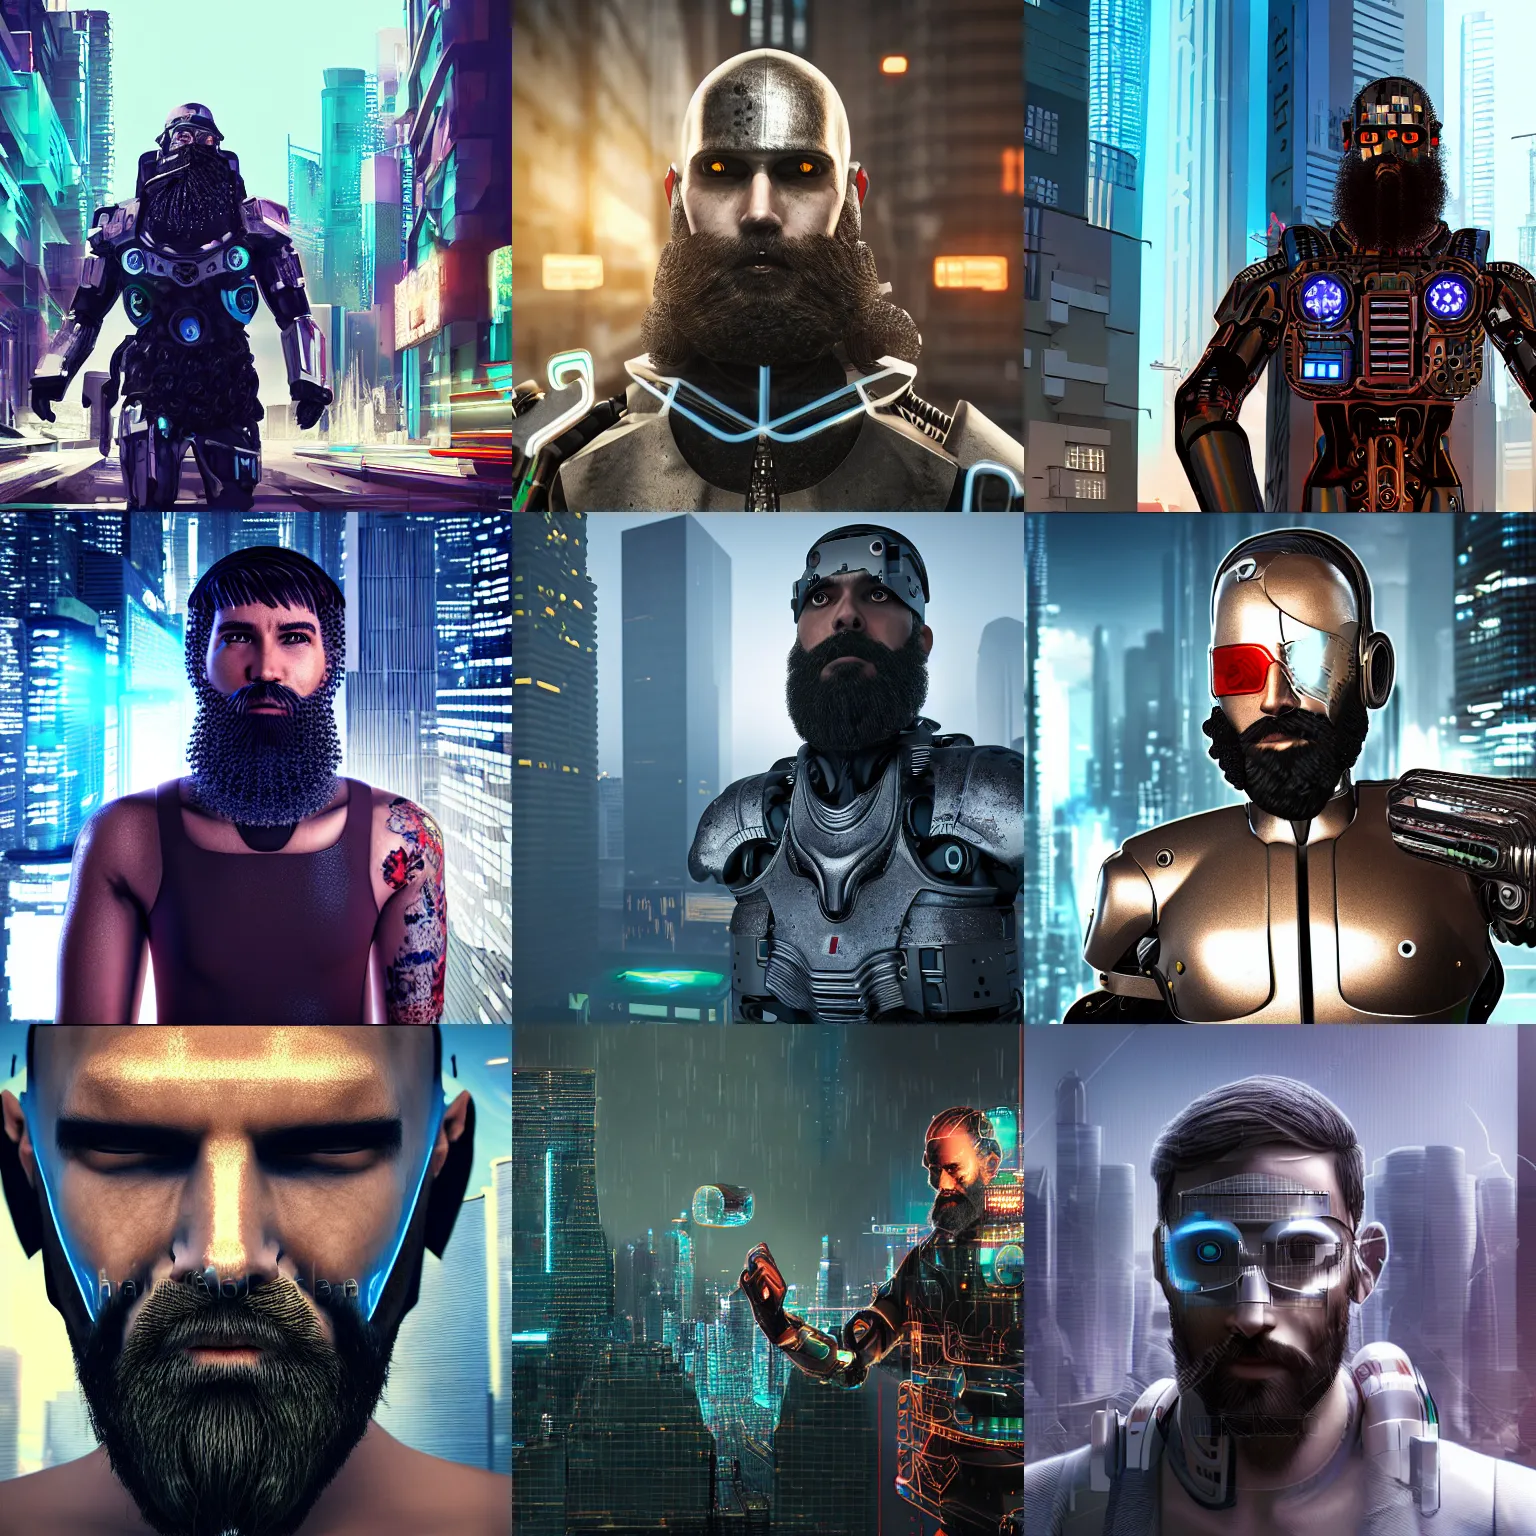 Prompt: Cyborg bearded man with metamaterial armor, cyberpunk city background, photorealism